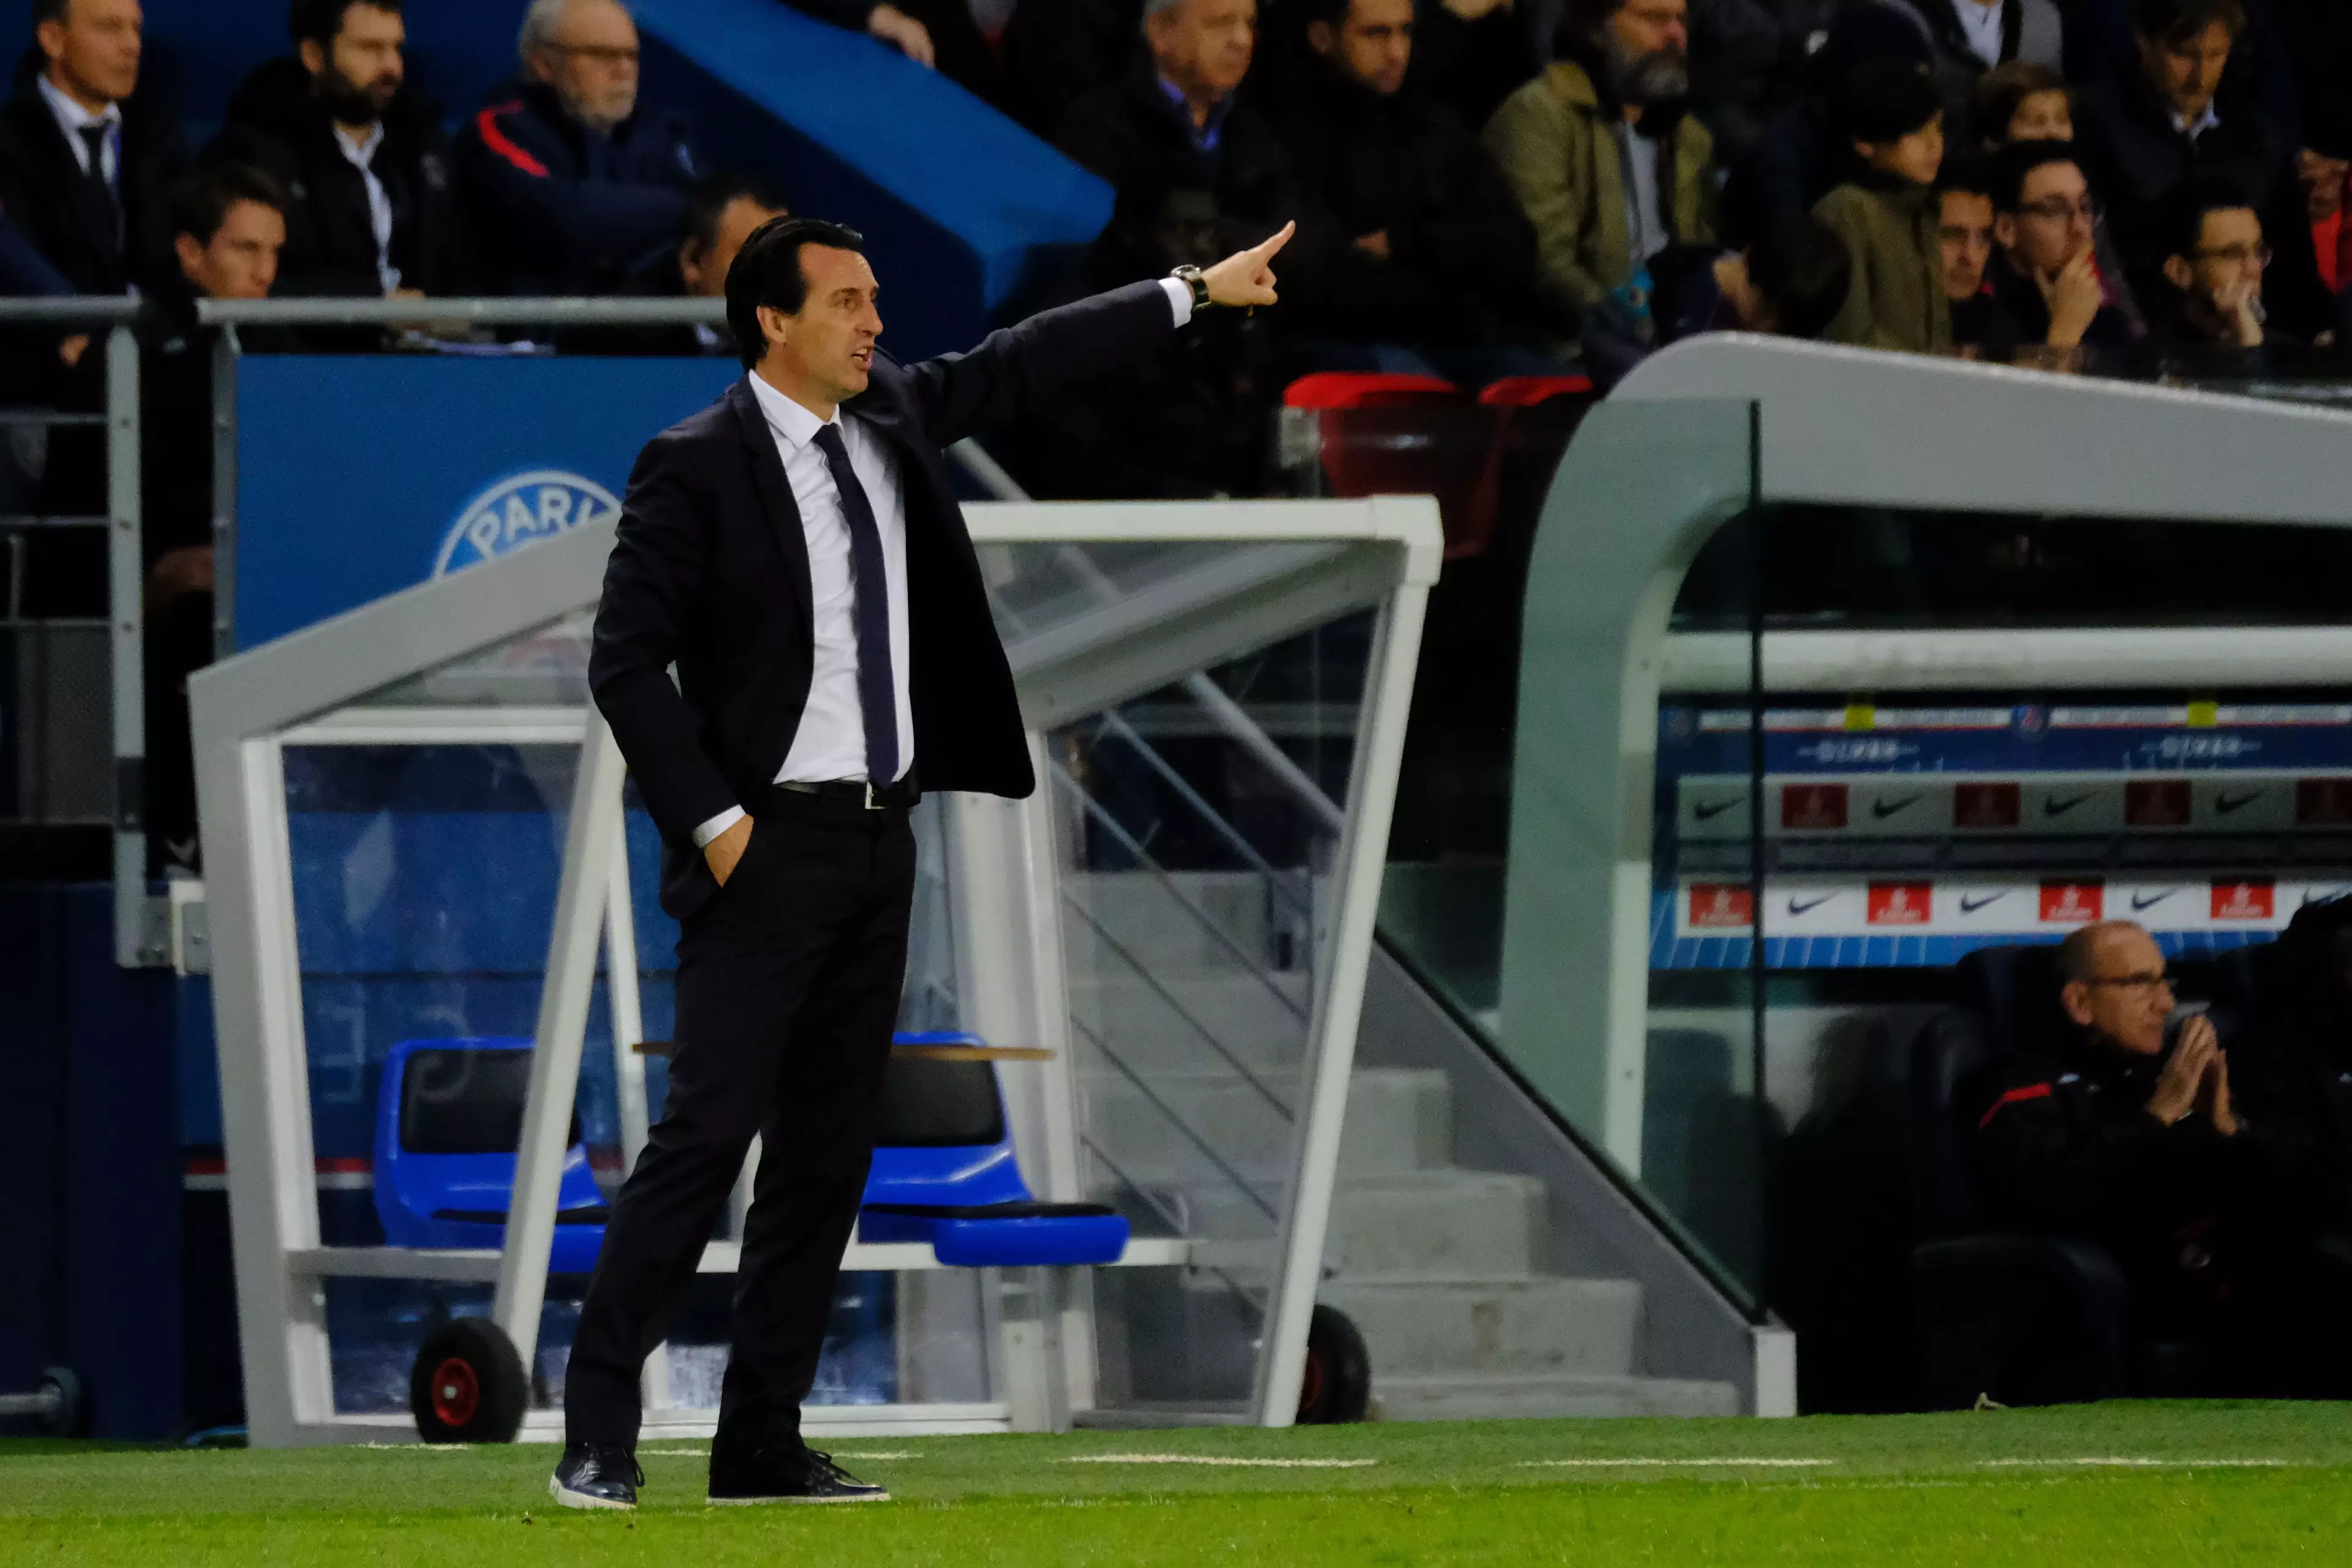 Unai Emery was Neymar's manager for his first year at the Parc des Princes (